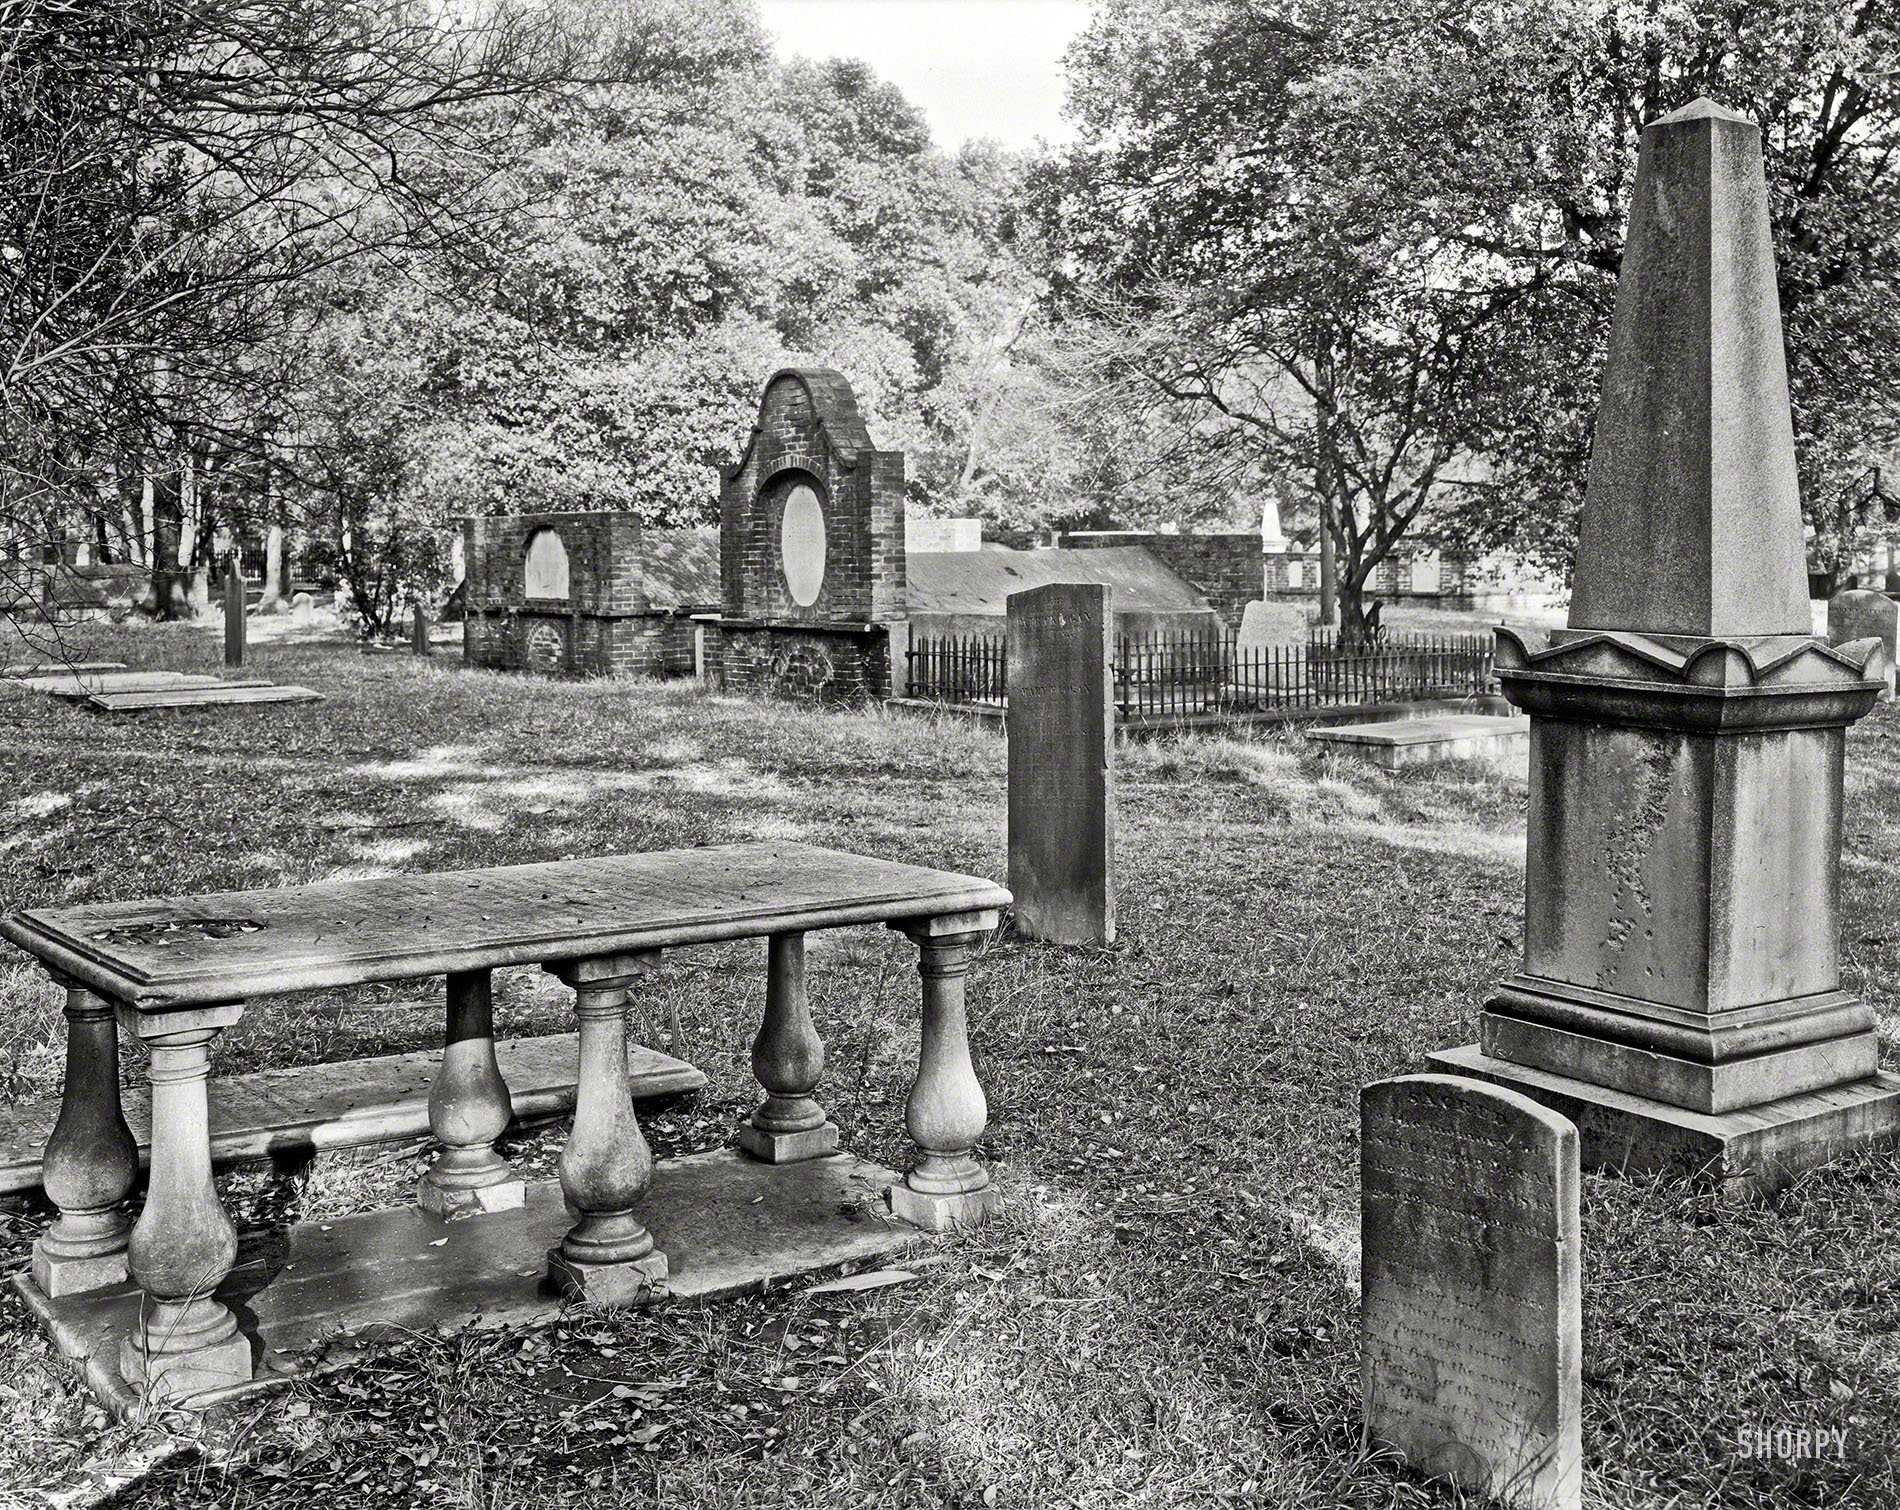 Circa 1939. "Savannah, Chatham County, Georgia. Stone monuments and brick vaults in Colonial Park, formerly South Broad Street Cemetery." 8x10 inch acetate negative by Frances Benjamin Johnston. View full size.